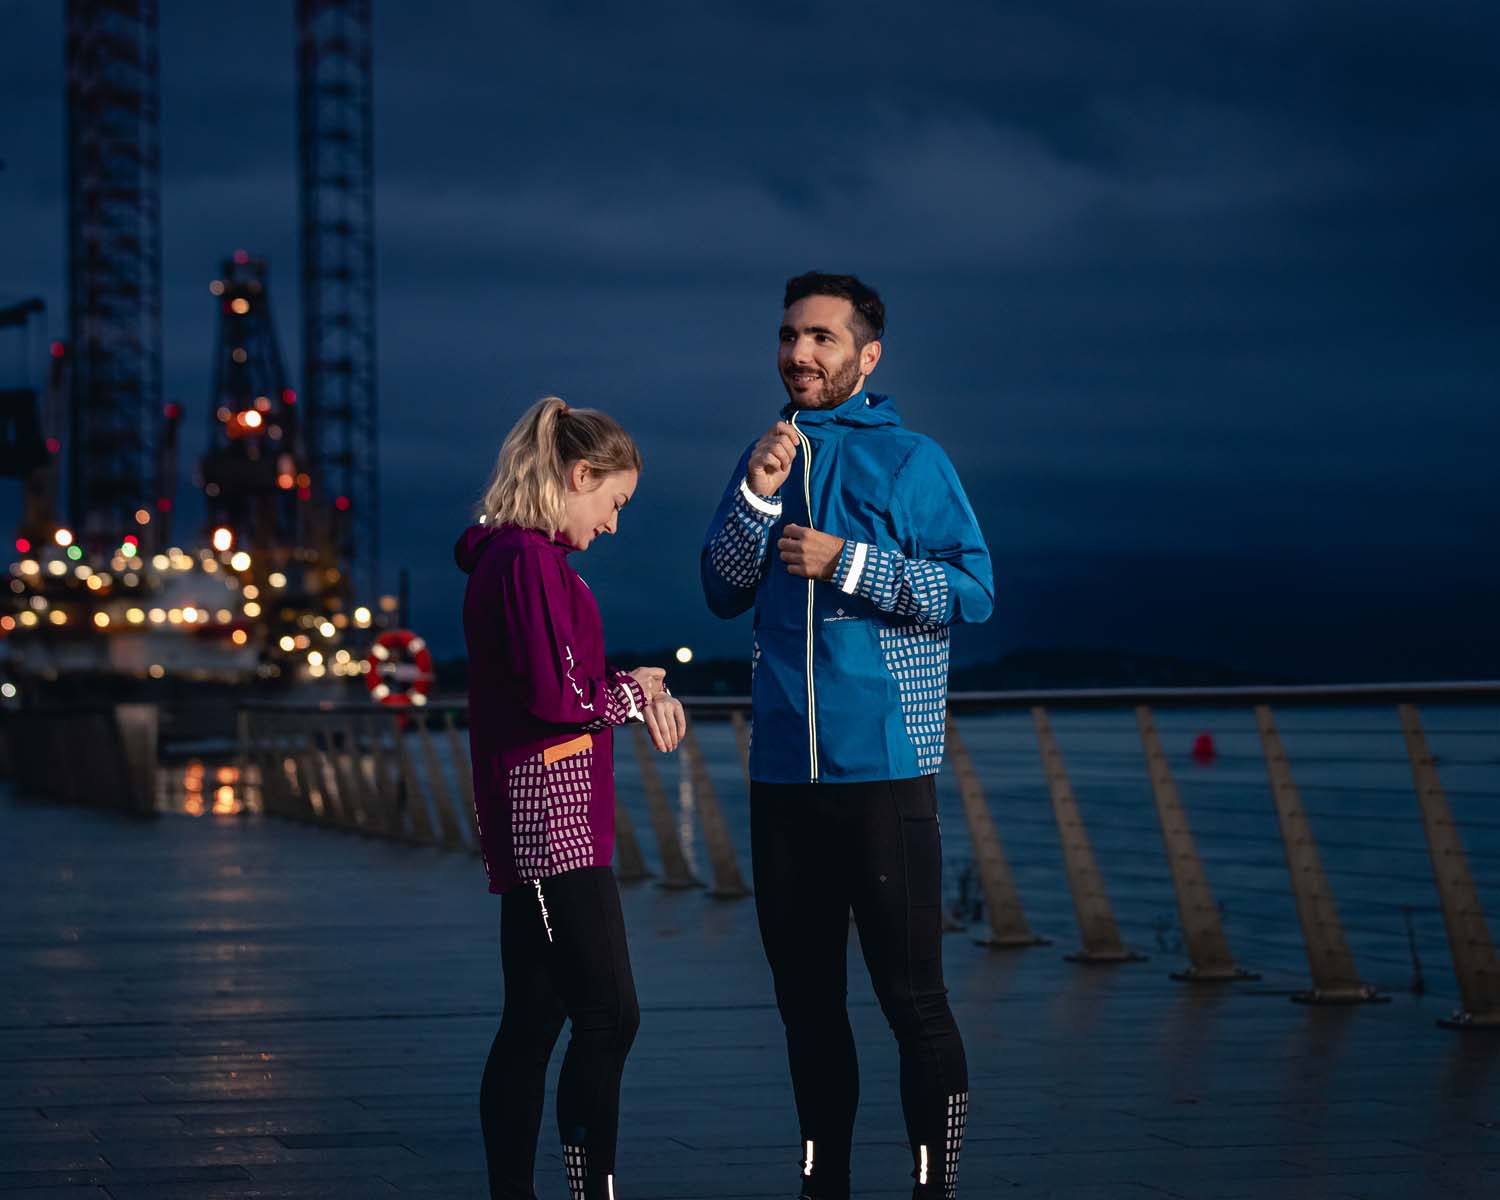 Two runners standing next to water in reflective clothing